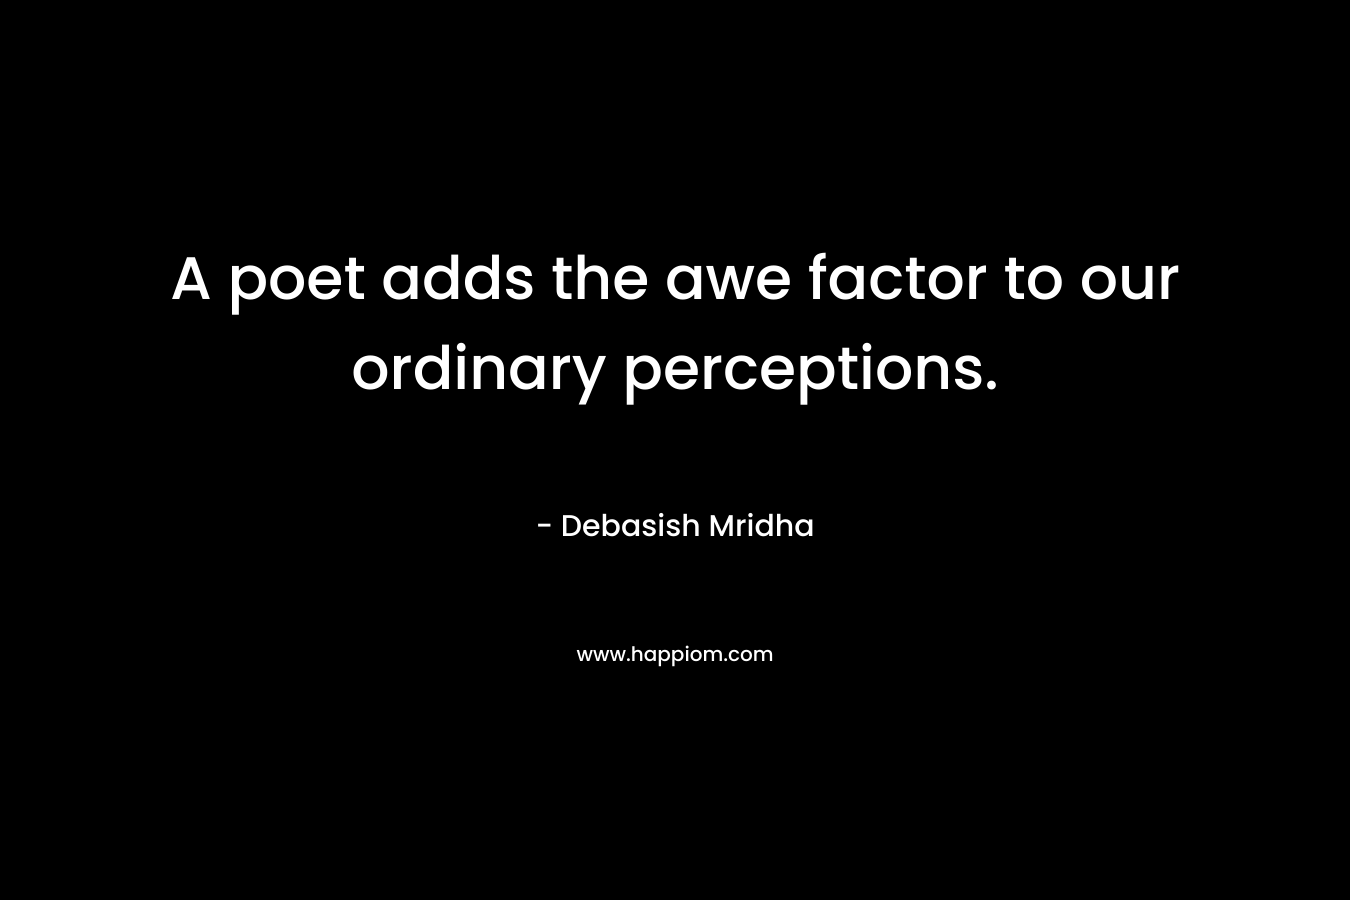 A poet adds the awe factor to our ordinary perceptions.